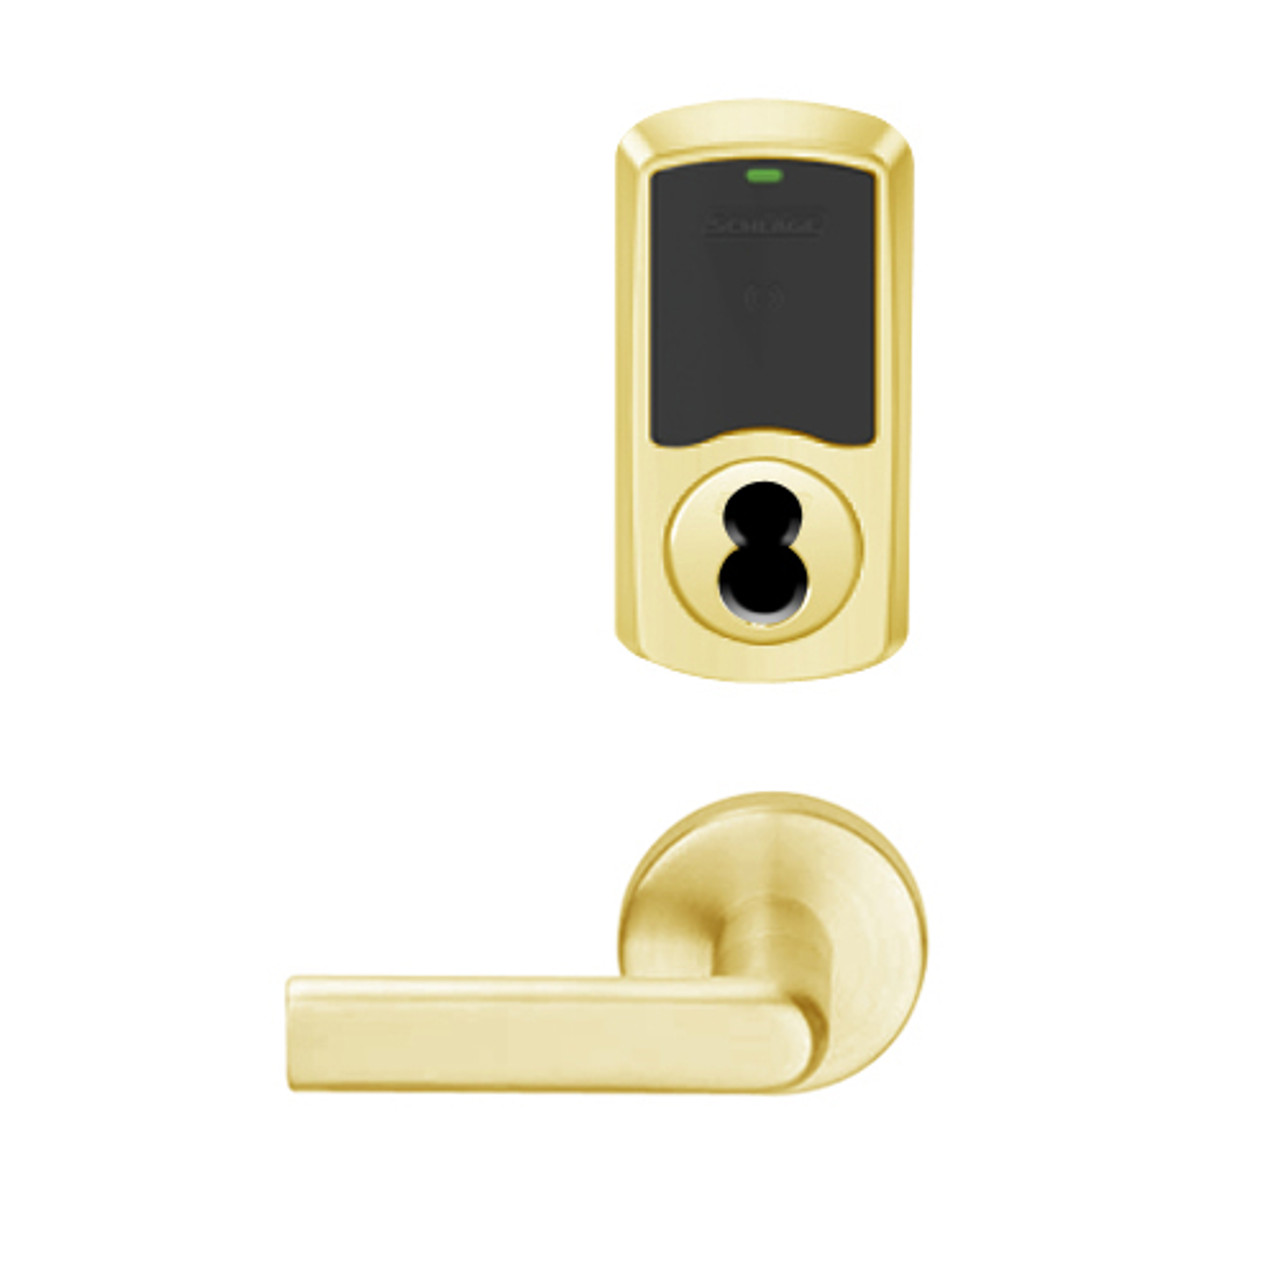 LEMB-GRW-J-01-605-00C Schlage Privacy/Office Wireless Greenwich Mortise Lock with Push Button & LED Indicator and 01 Lever Prepped for FSIC in Bright Brass